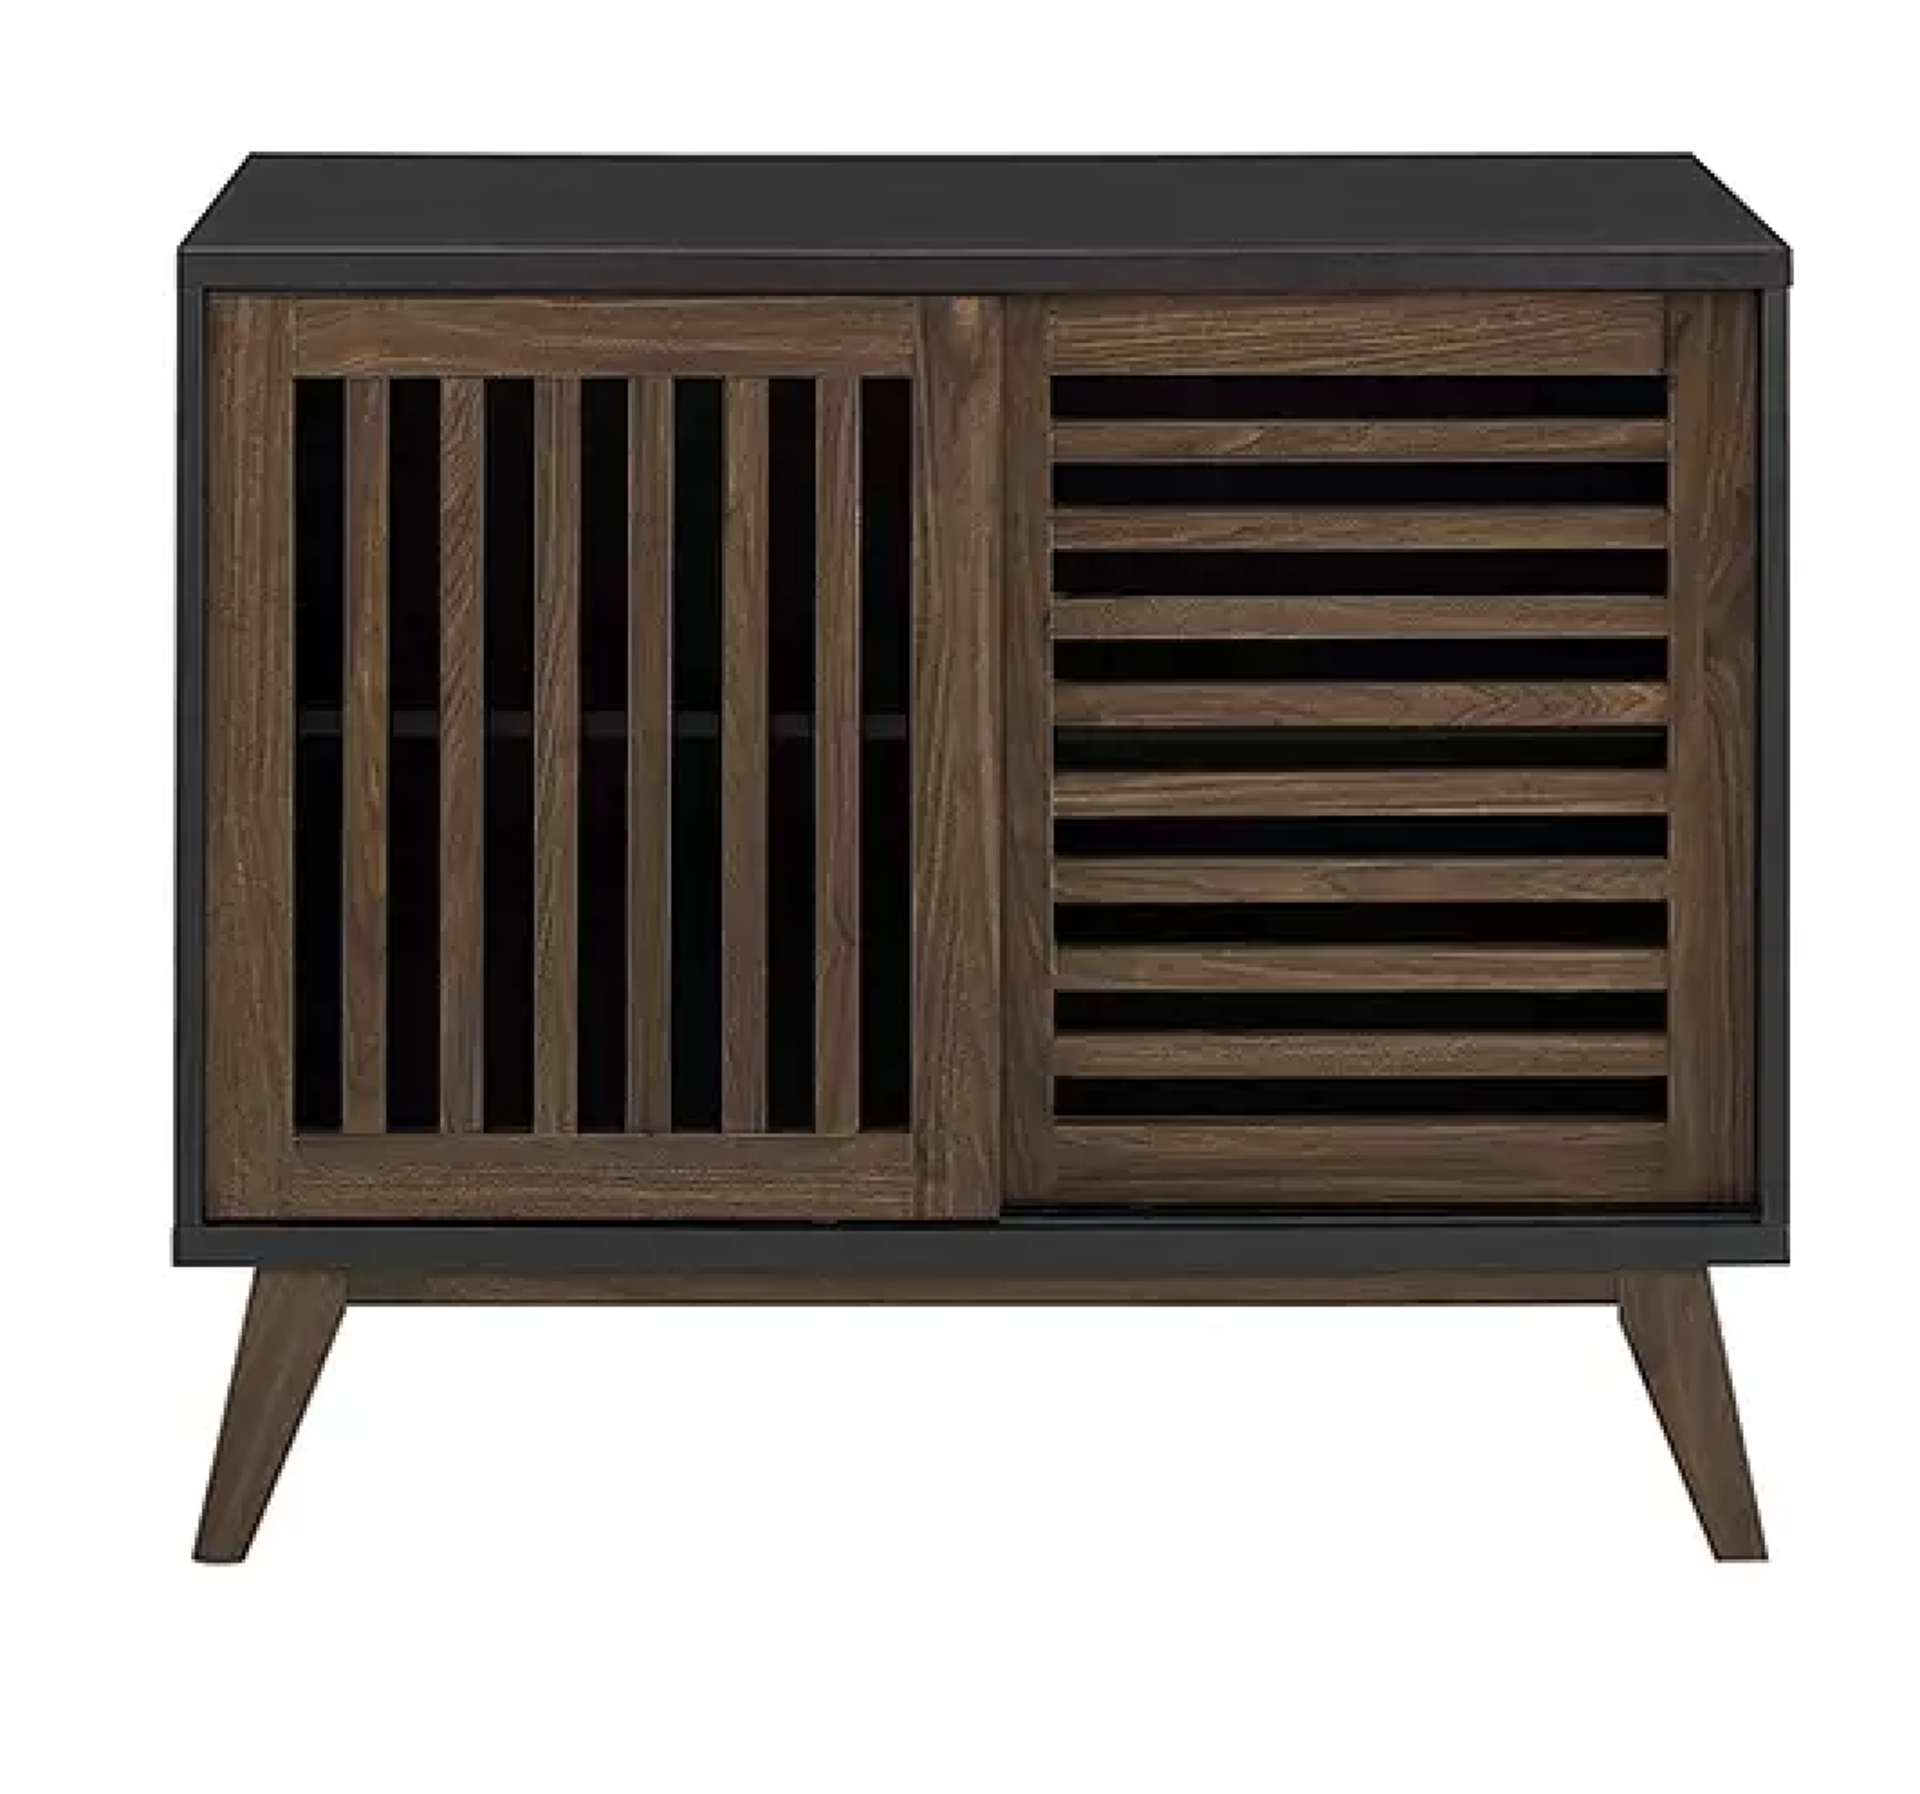 A1 PRODUCT NEW - BECKFIELD SIDEBOARD IN BLACK/WALNUT - RRP Ã‚Â£215 - Image 2 of 5